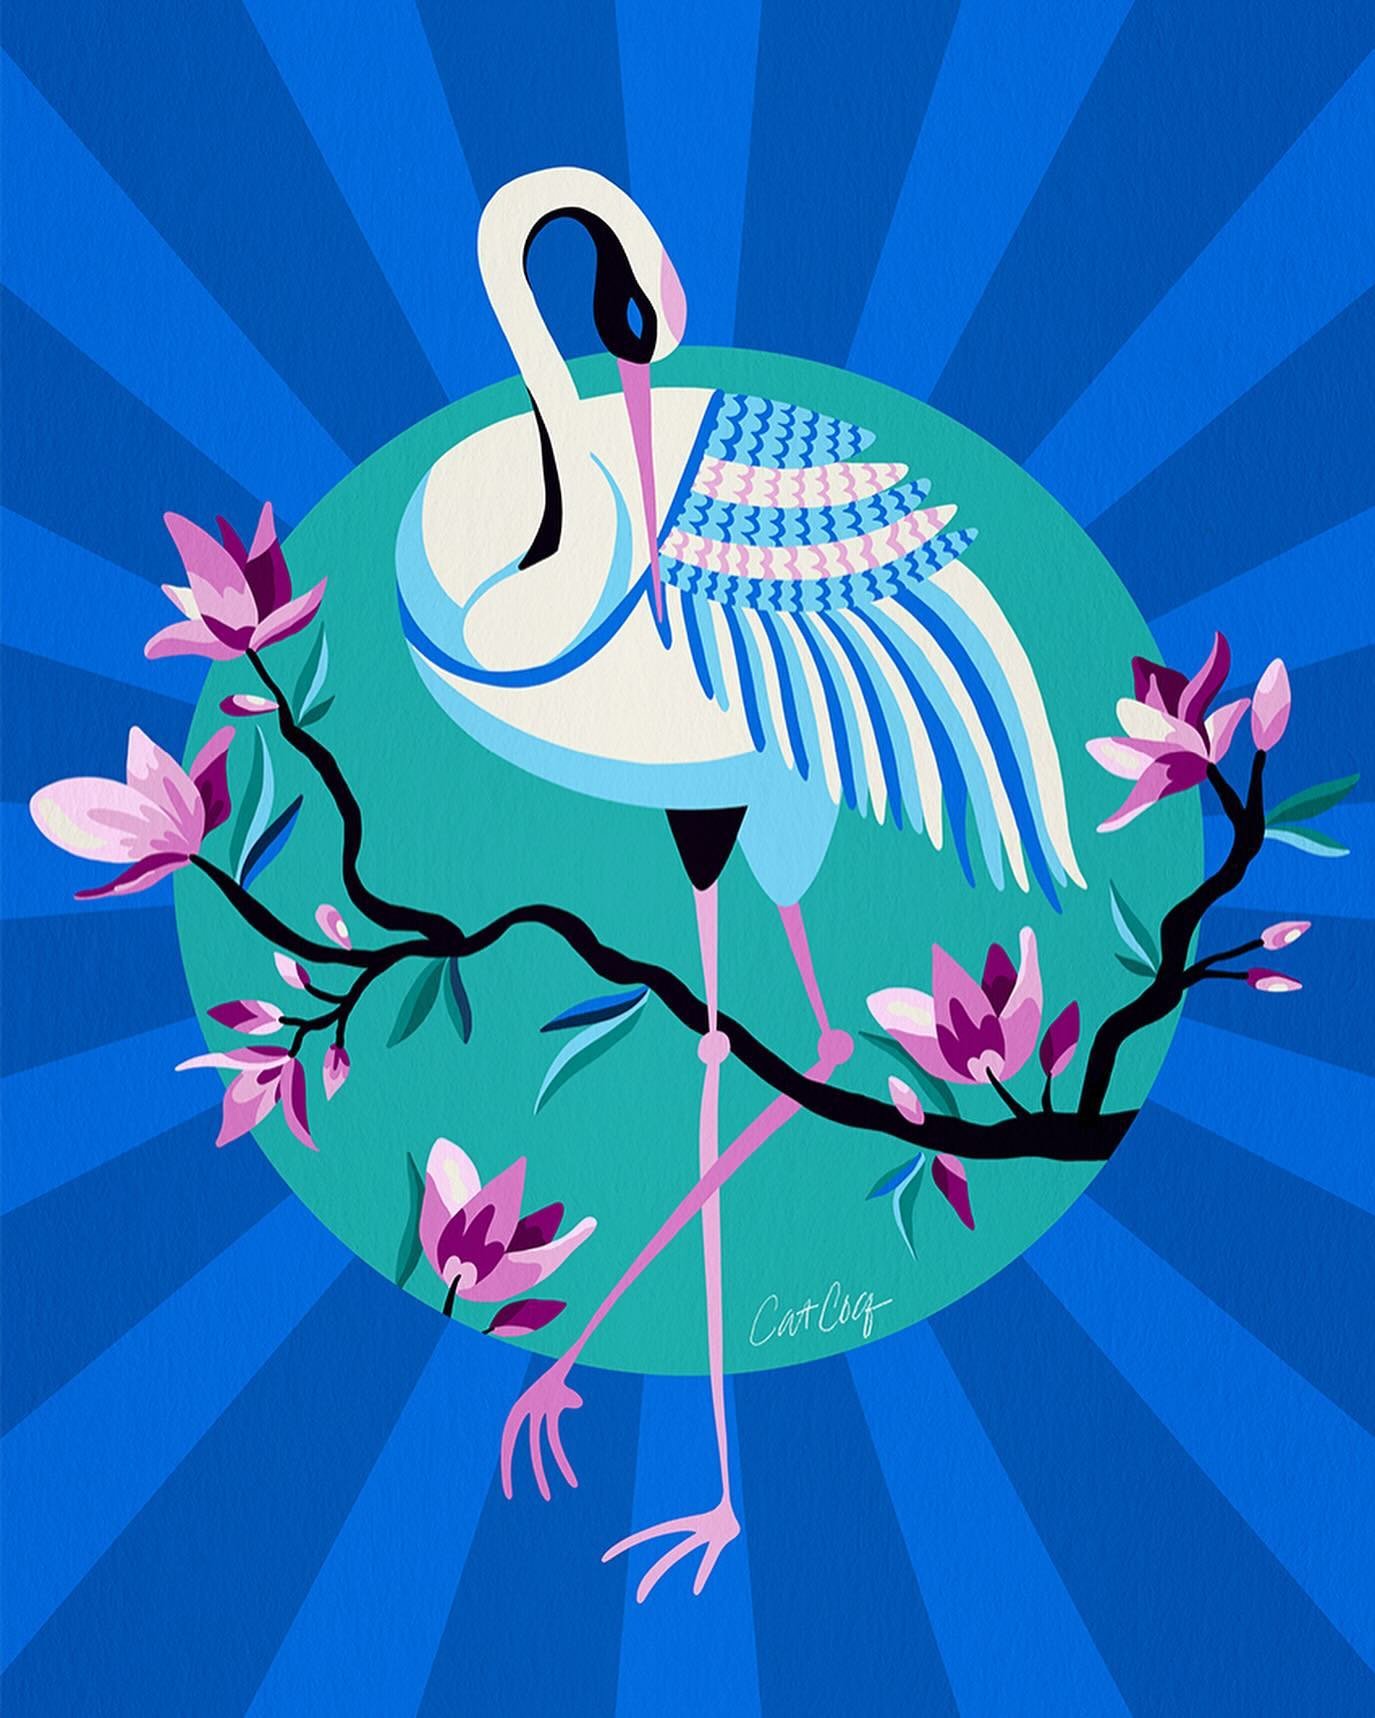 My graceful crane. 🪽 I pulled this crane out of my &ldquo;Tropical Birds Tree of Life&rdquo; illustration. (Swipe over to see.) Something I like about drawing complex designs is being able to isolate out bits &amp; pieces and turning them into their